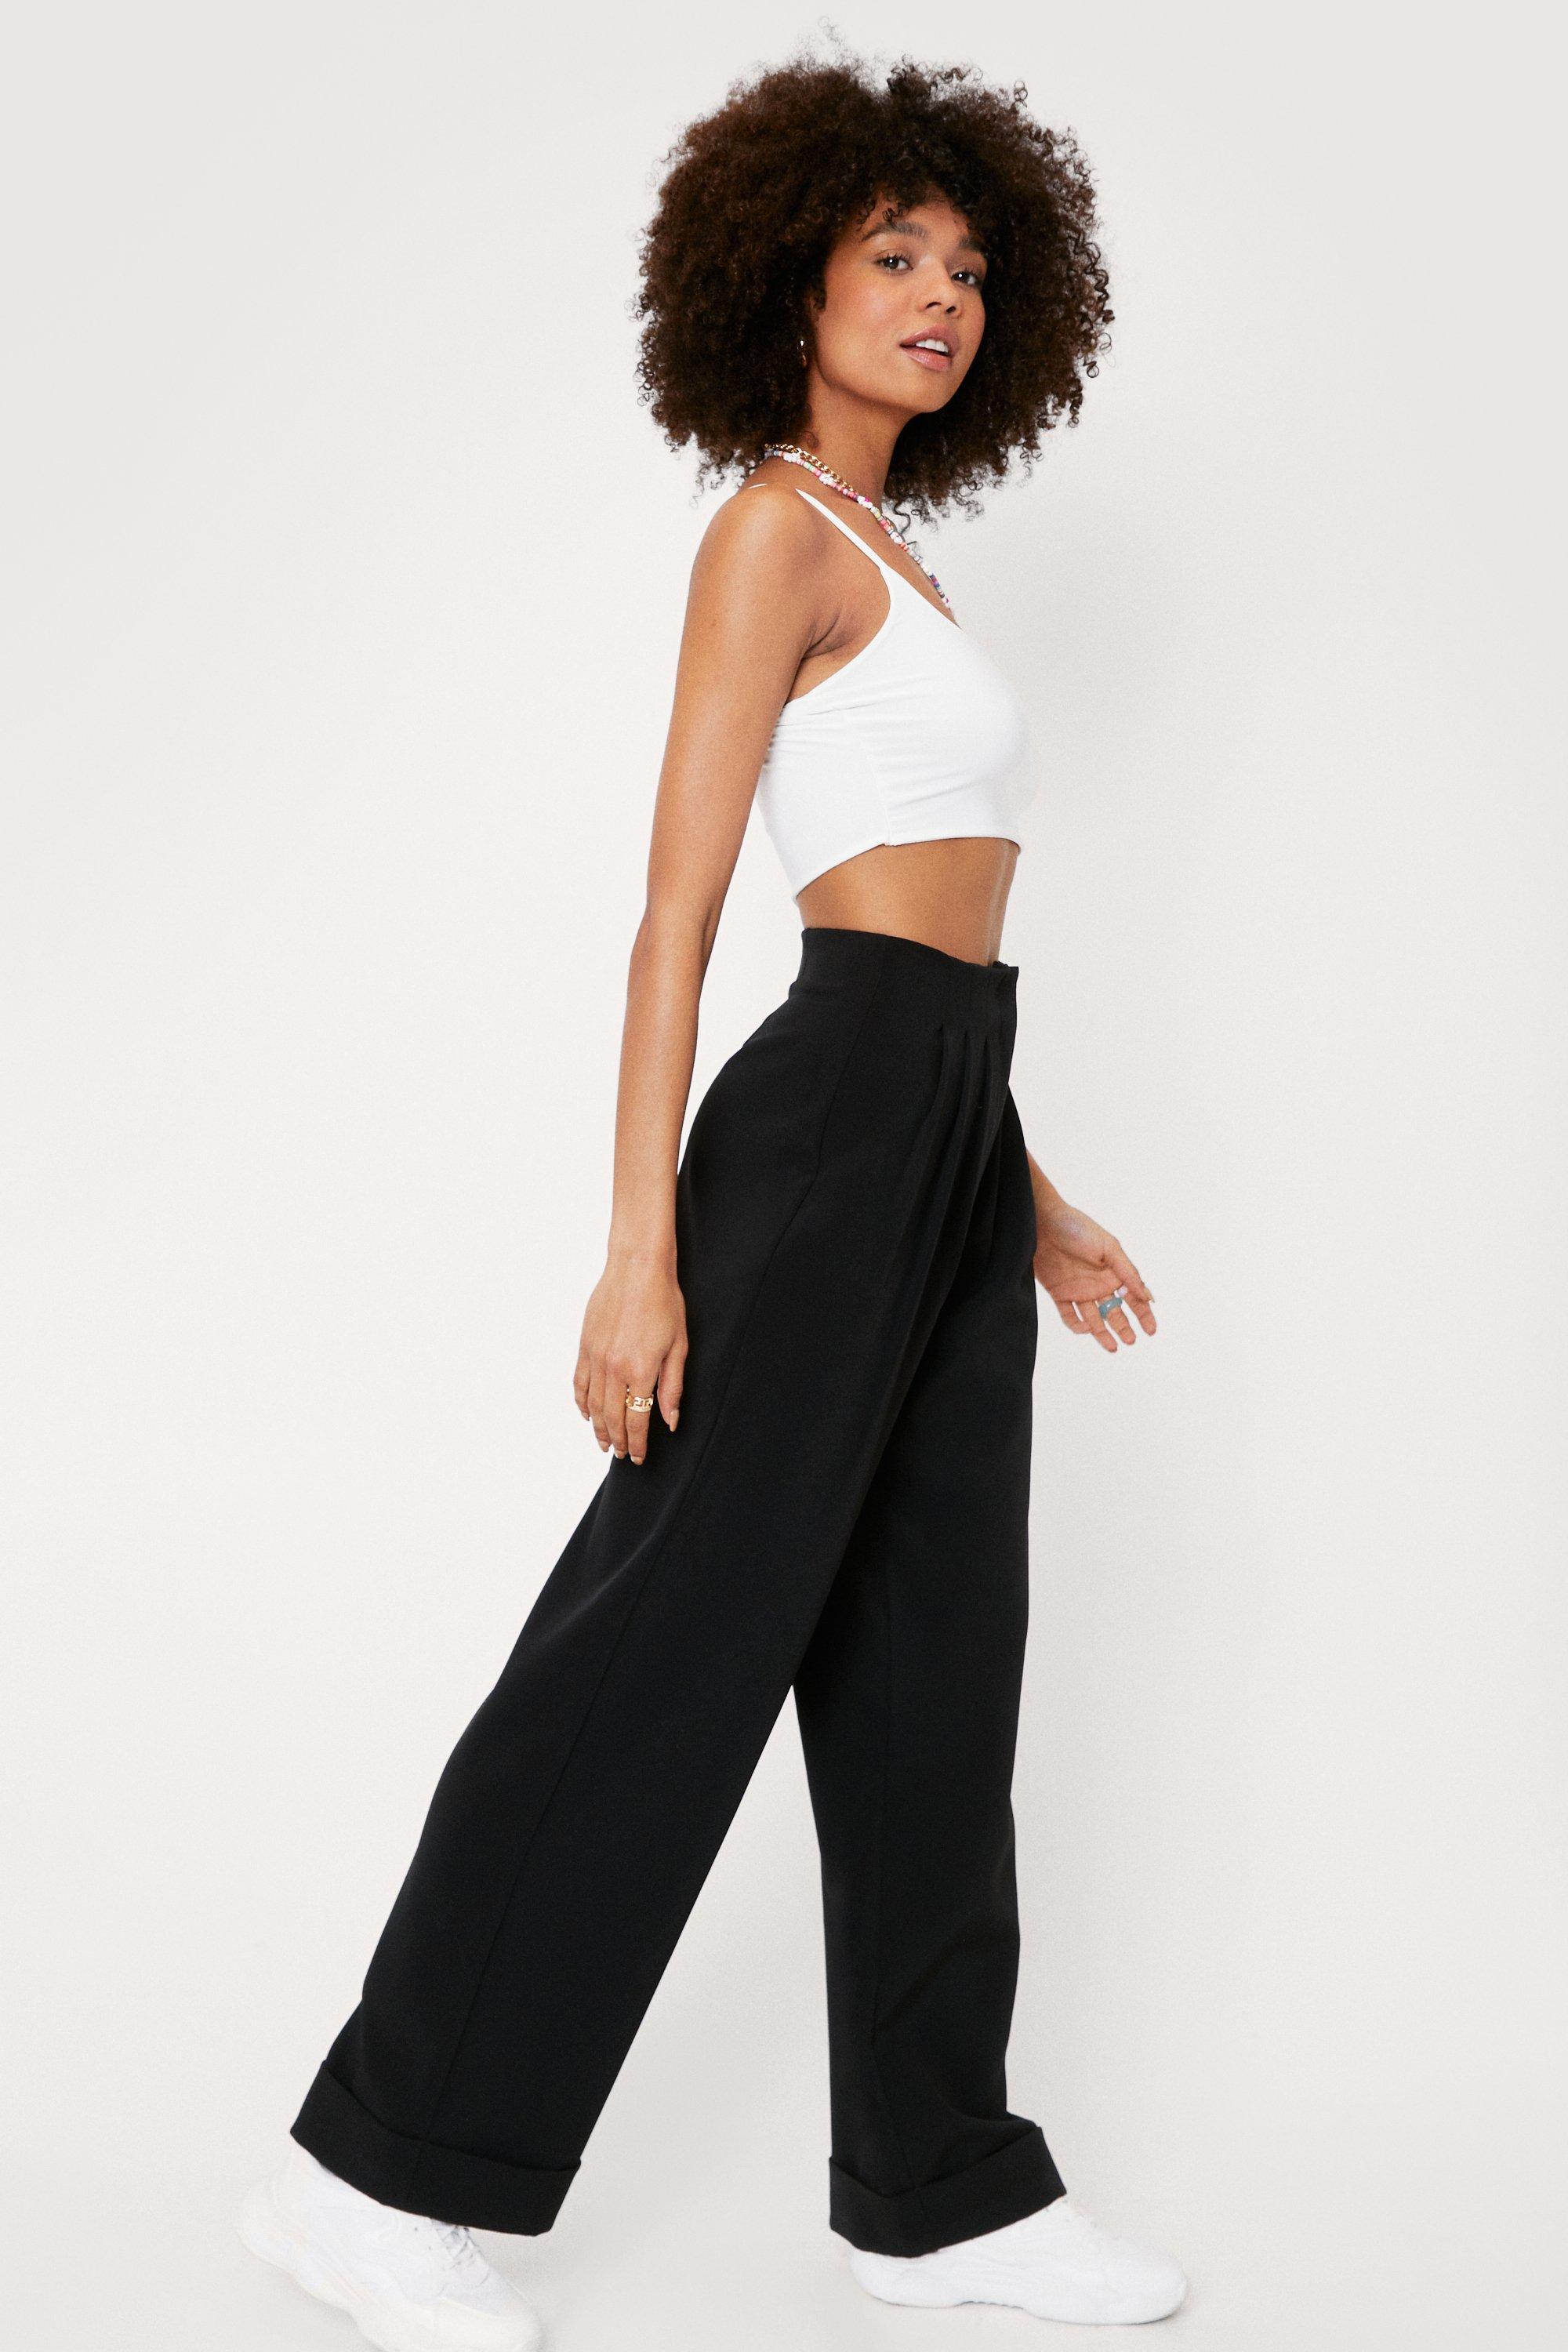 DARTED TROUSERS WITH TURN-UP HEMS - Black